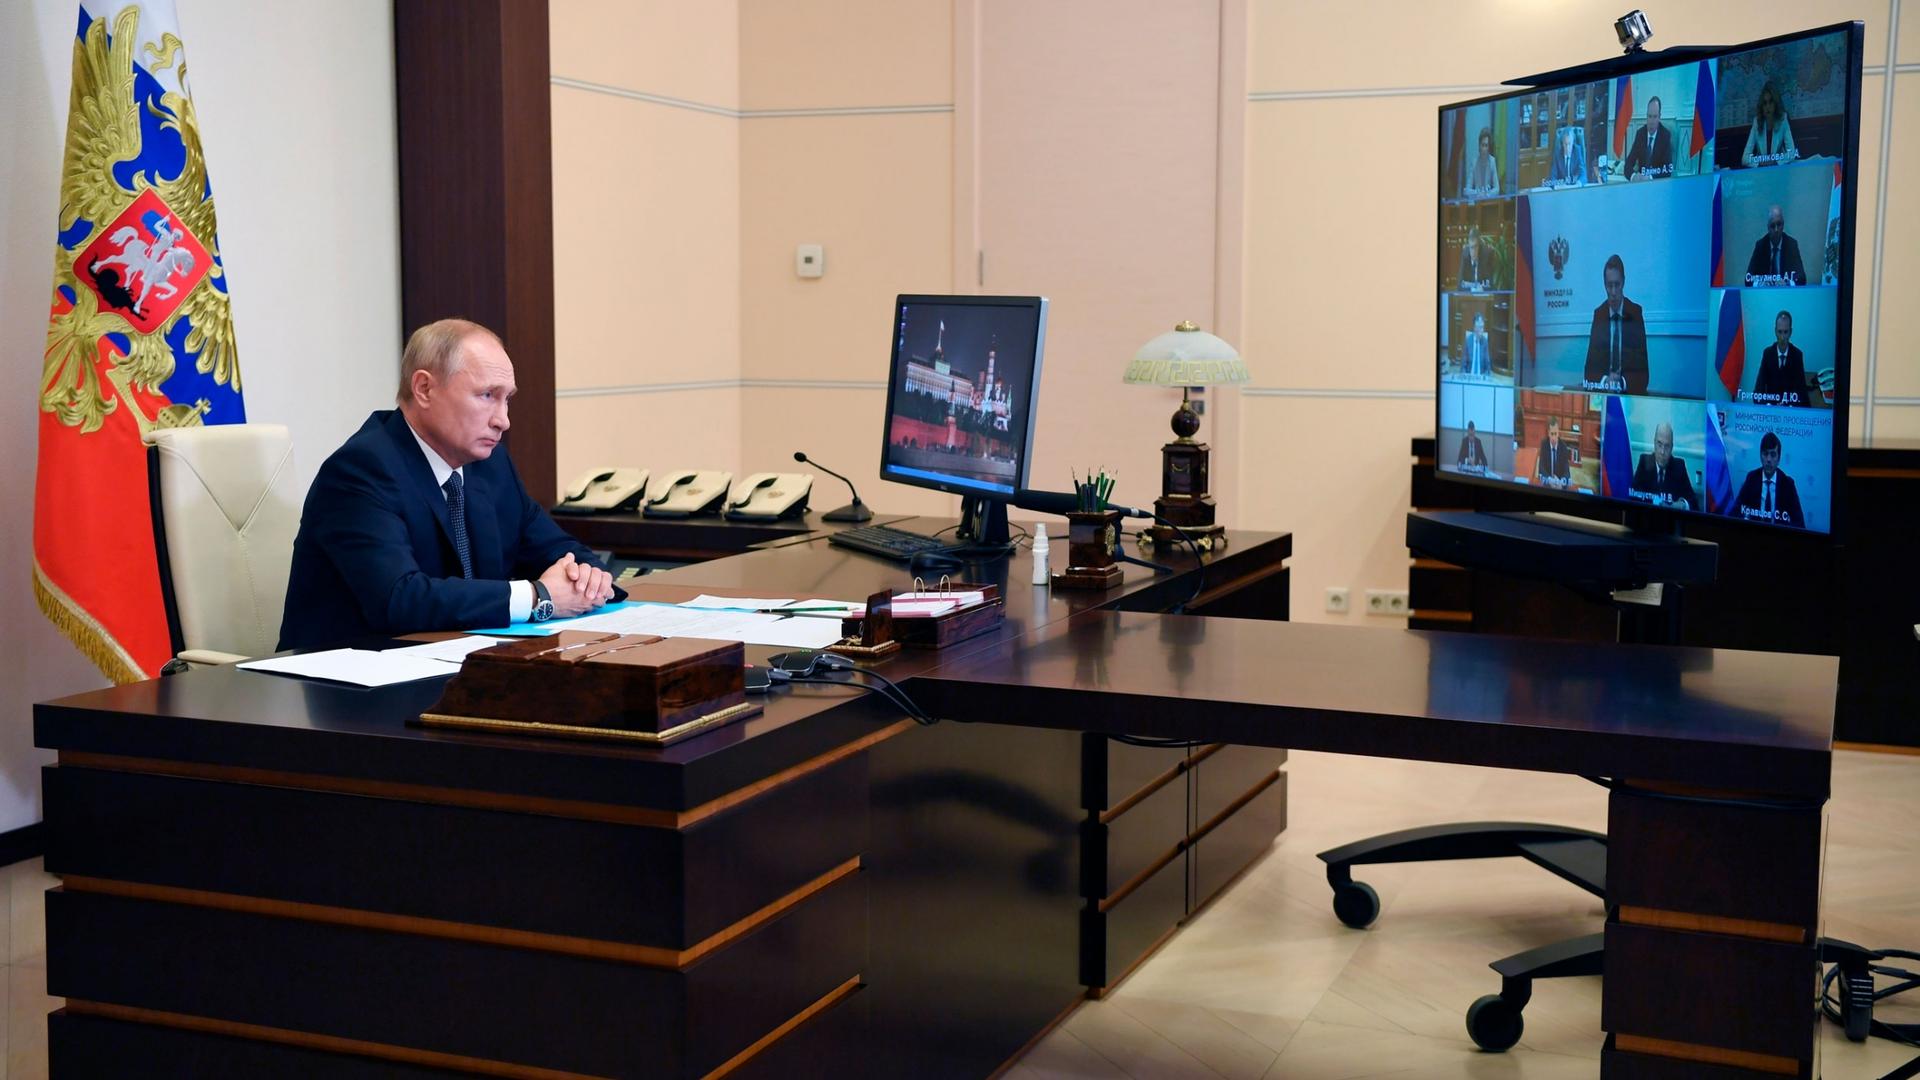 Russian President Vladimir Putin attends a virtual cabinet meeting while sitting at a large wooden desk with a television monitor showing several officials.